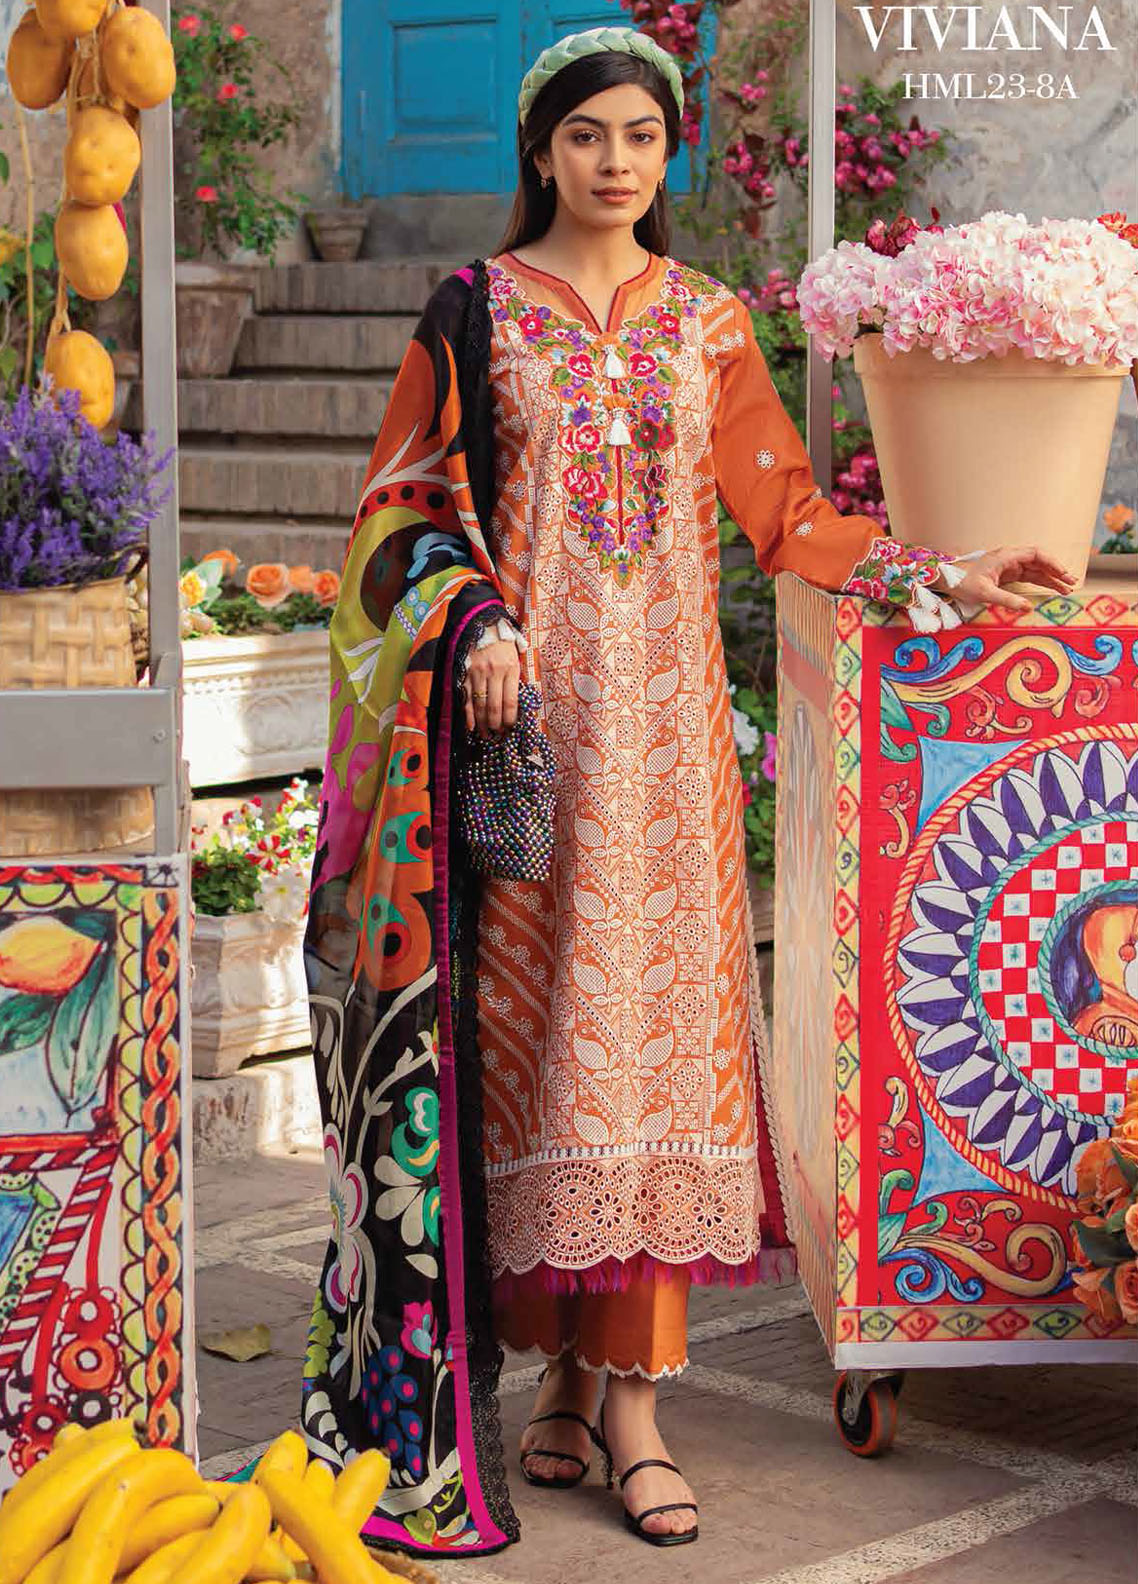 Hemline by Mushq Embroidered Lawn Suits Unstitched 3 Piece MQ23HMS HML23-8A VIVIANA - Spring / Summer Collection